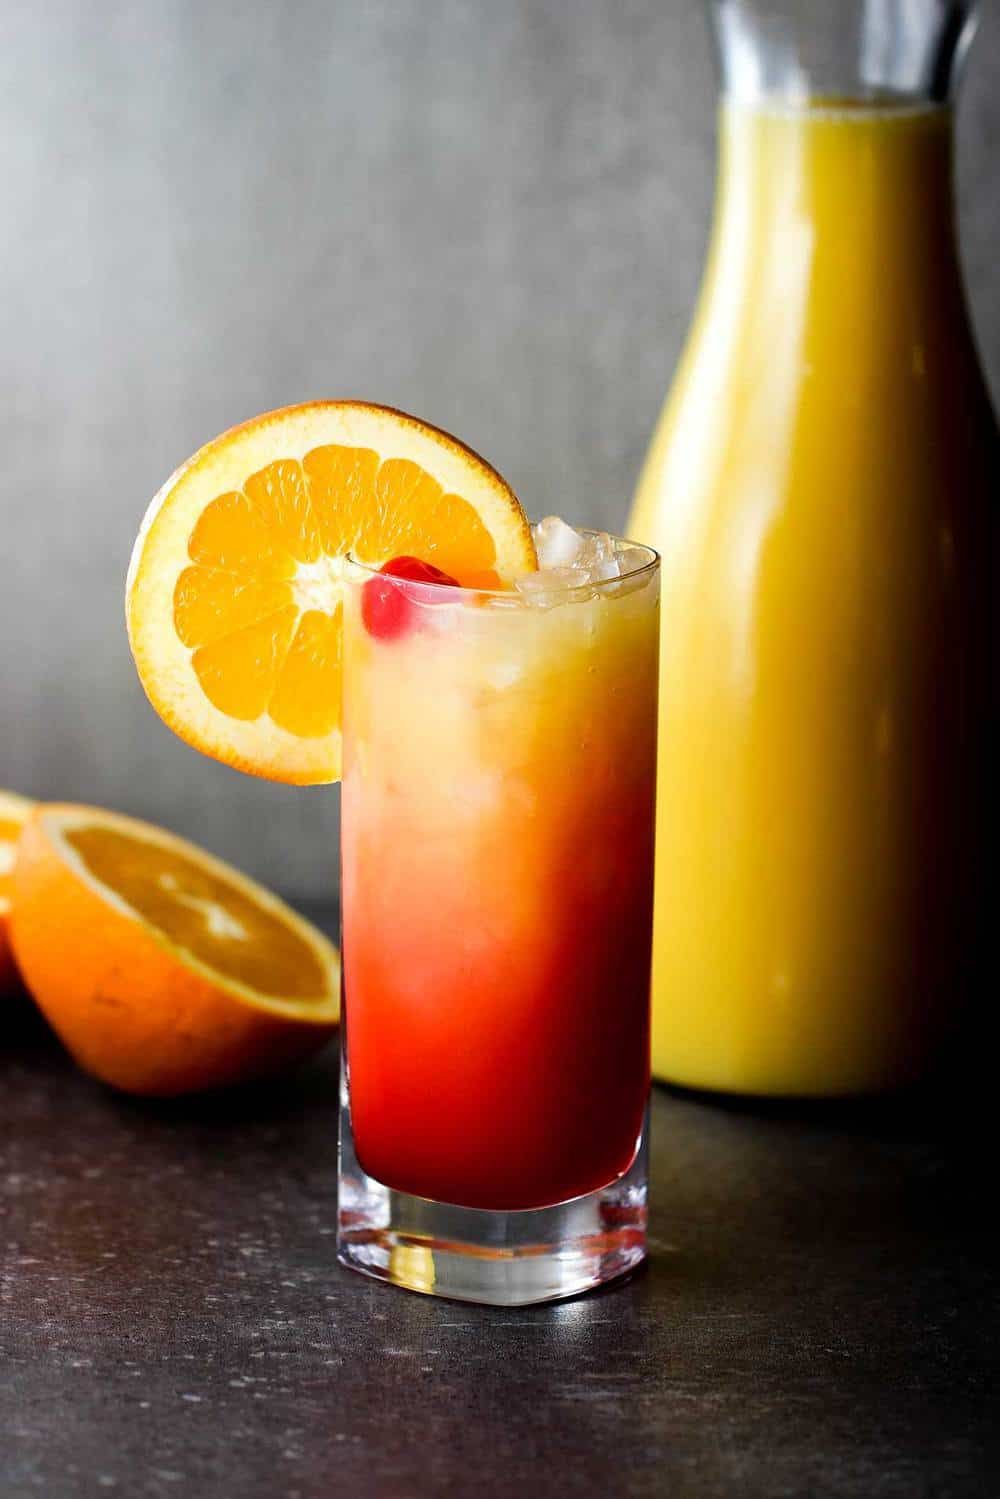 How to Make a Classic Tequila Sunrise